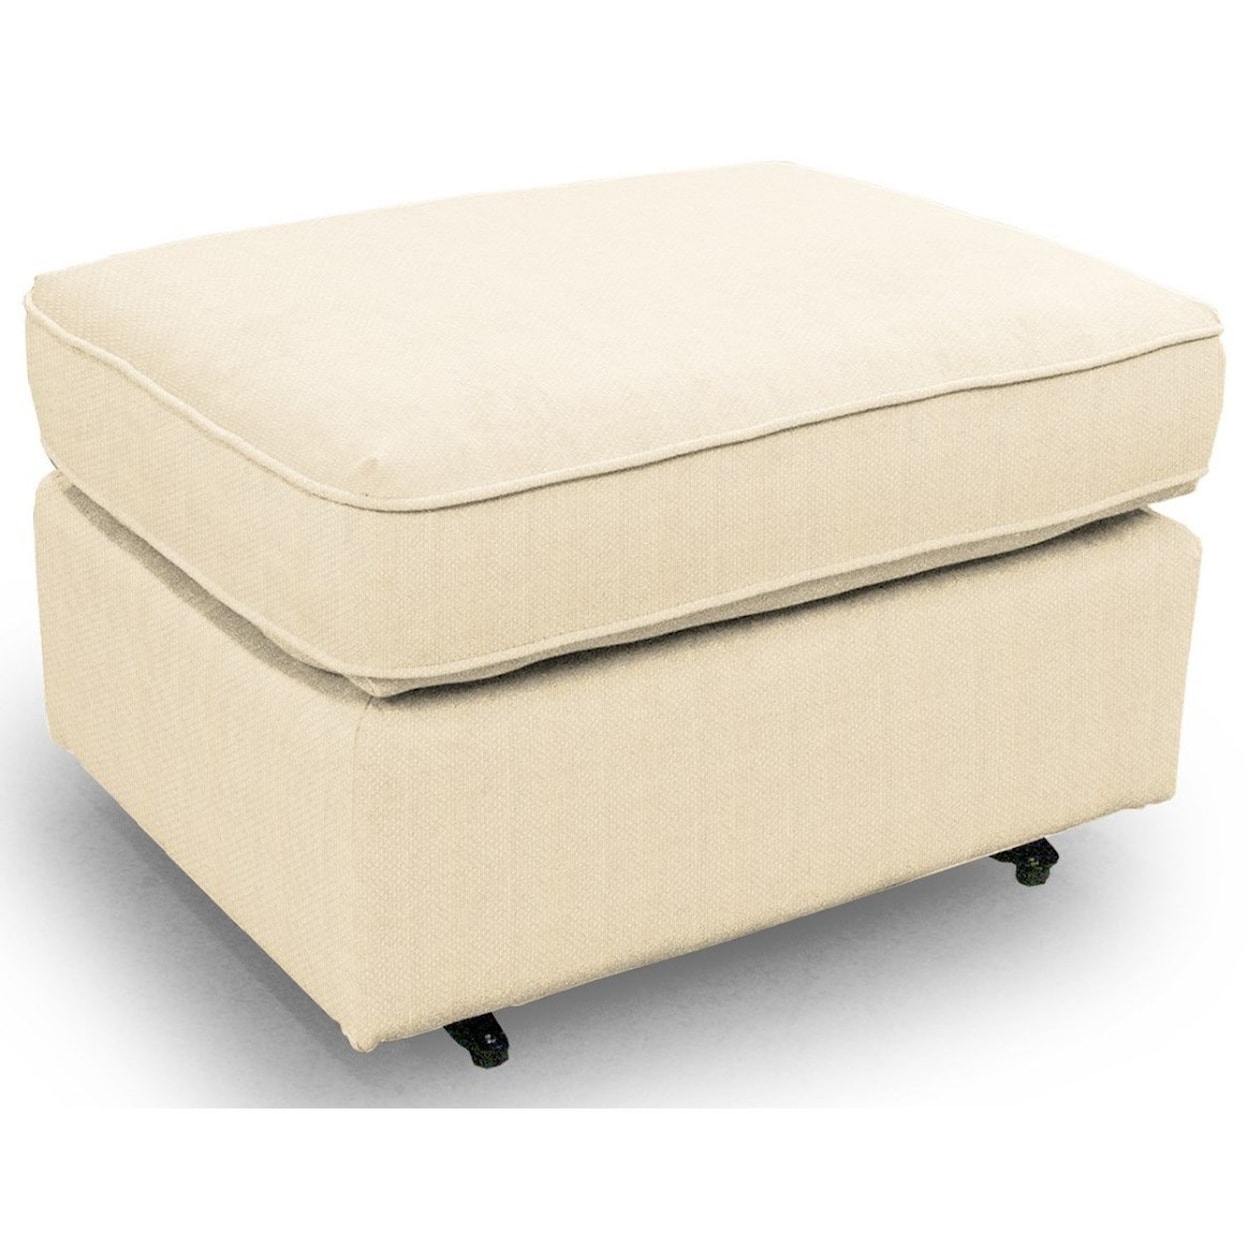 Bravo Furniture Ottomans Rounded Casual Ottoman